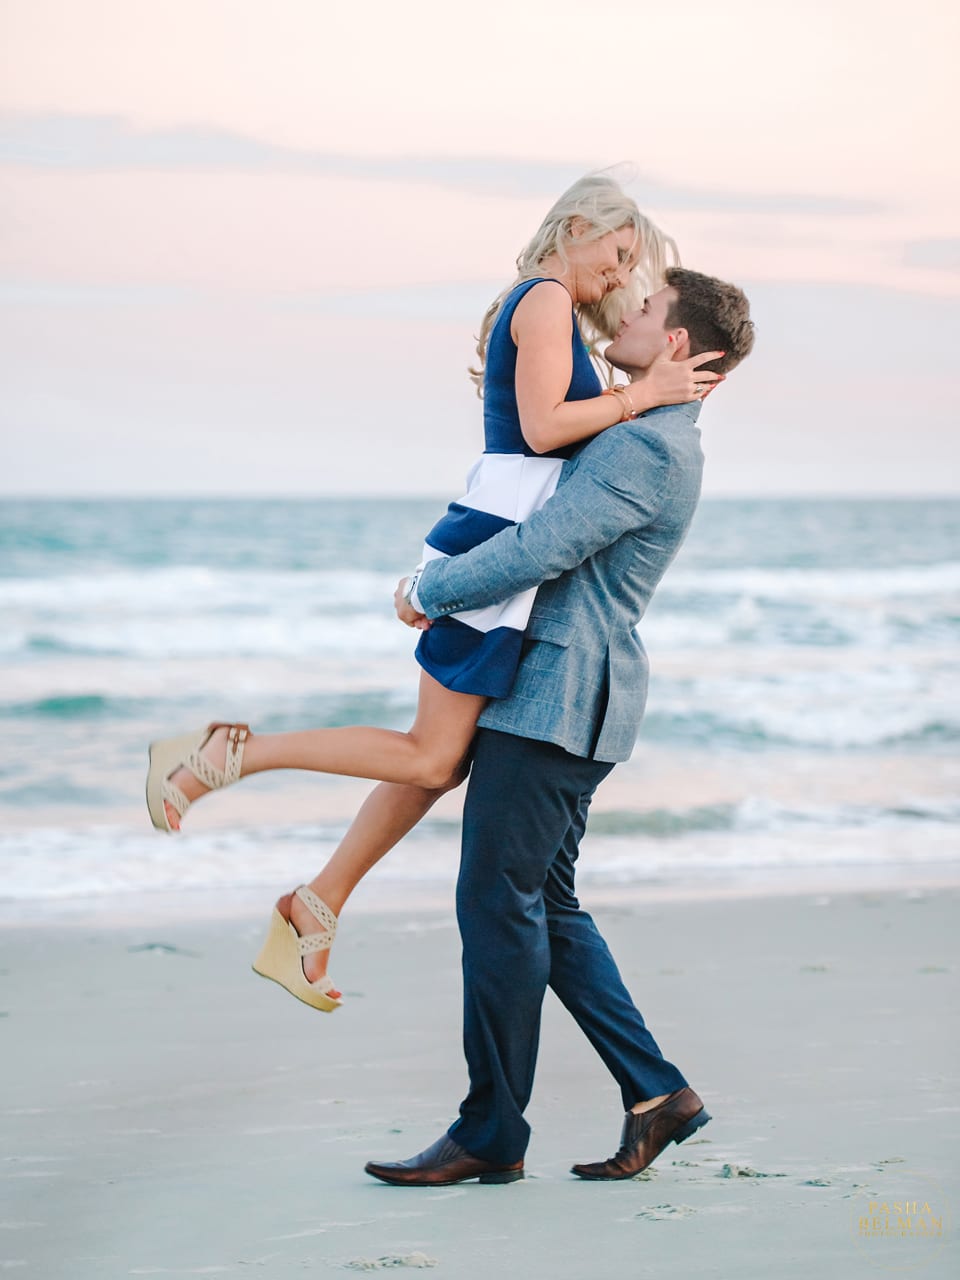 Engagement pictures Charleston engagement photography by Pasha Belman Photographers